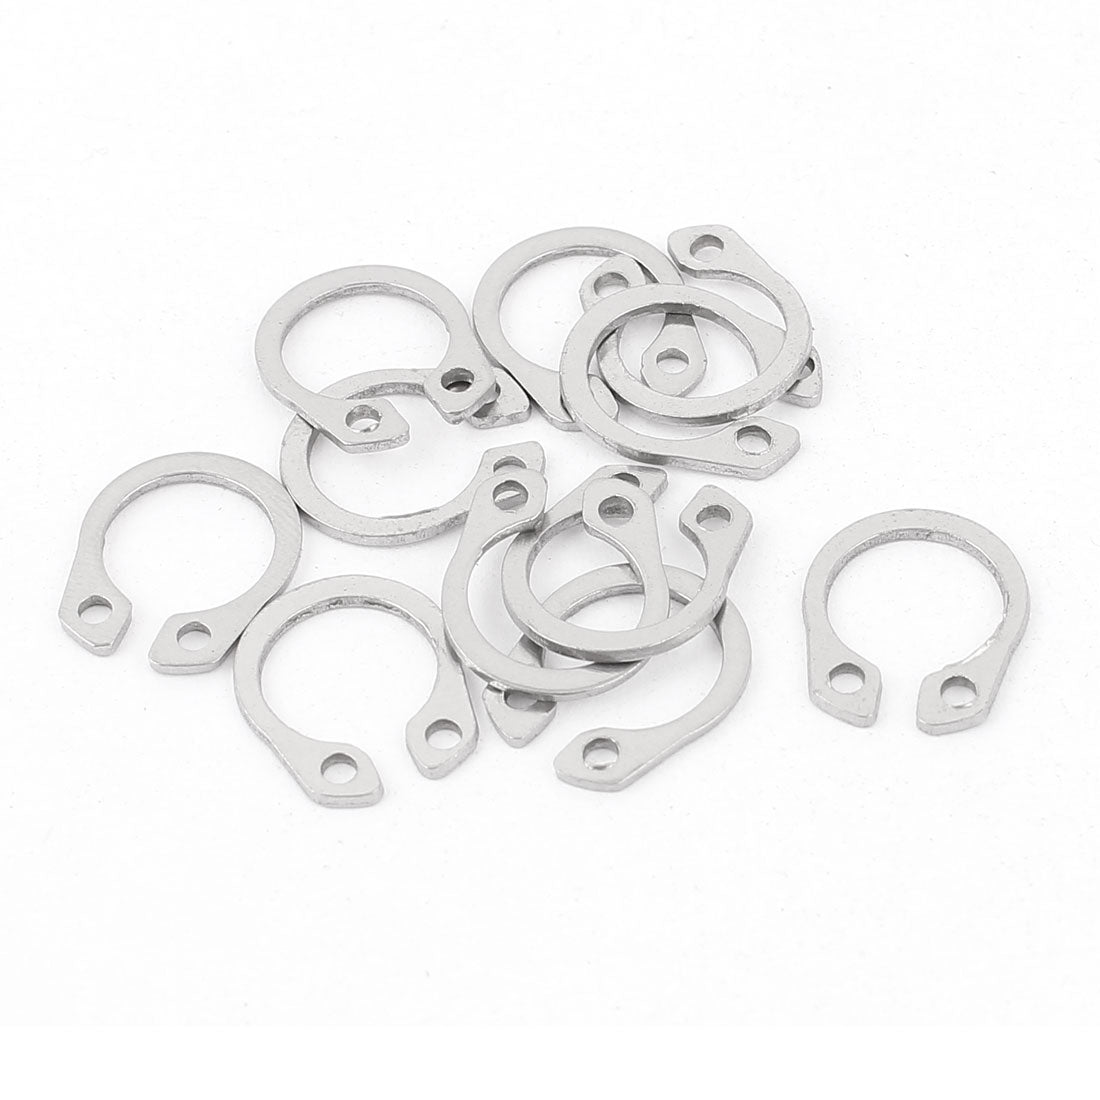 uxcell Uxcell 10pcs 304 Stainless Steel External Circlip Retaining Shaft Snap Rings 10mm